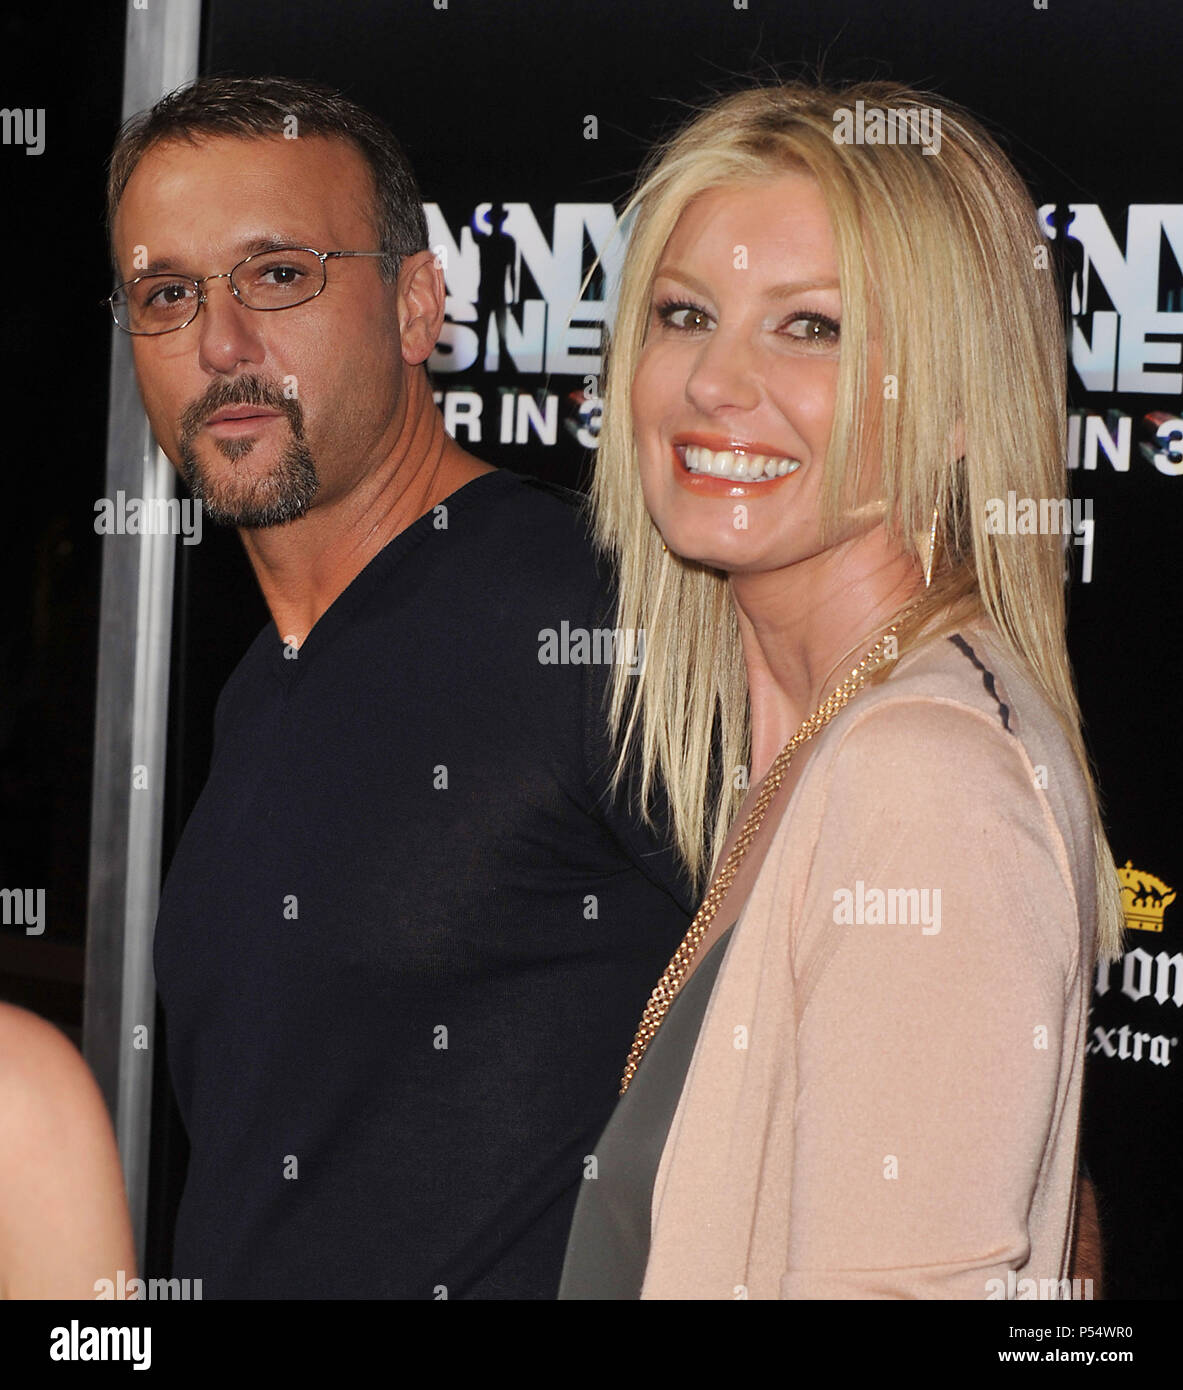 Faith Hill   Tim McGraw  44   - Kenny Chesney: Summer In 3-D Premiere In Las Vegas.Faith Hill   Tim McGraw  44  Event in Hollywood Life - California, Red Carpet Event, USA, Film Industry, Celebrities, Photography, Bestof, Arts Culture and Entertainment, Celebrities fashion, Best of, Hollywood Life, Event in Hollywood Life - California, Red Carpet and backstage, Music celebrities, Topix, Couple, family ( husband and wife ) and kids- Children, brothers and sisters inquiry tsuni@Gamma-USA.com, Credit Tsuni / USA, 2010 Stock Photo